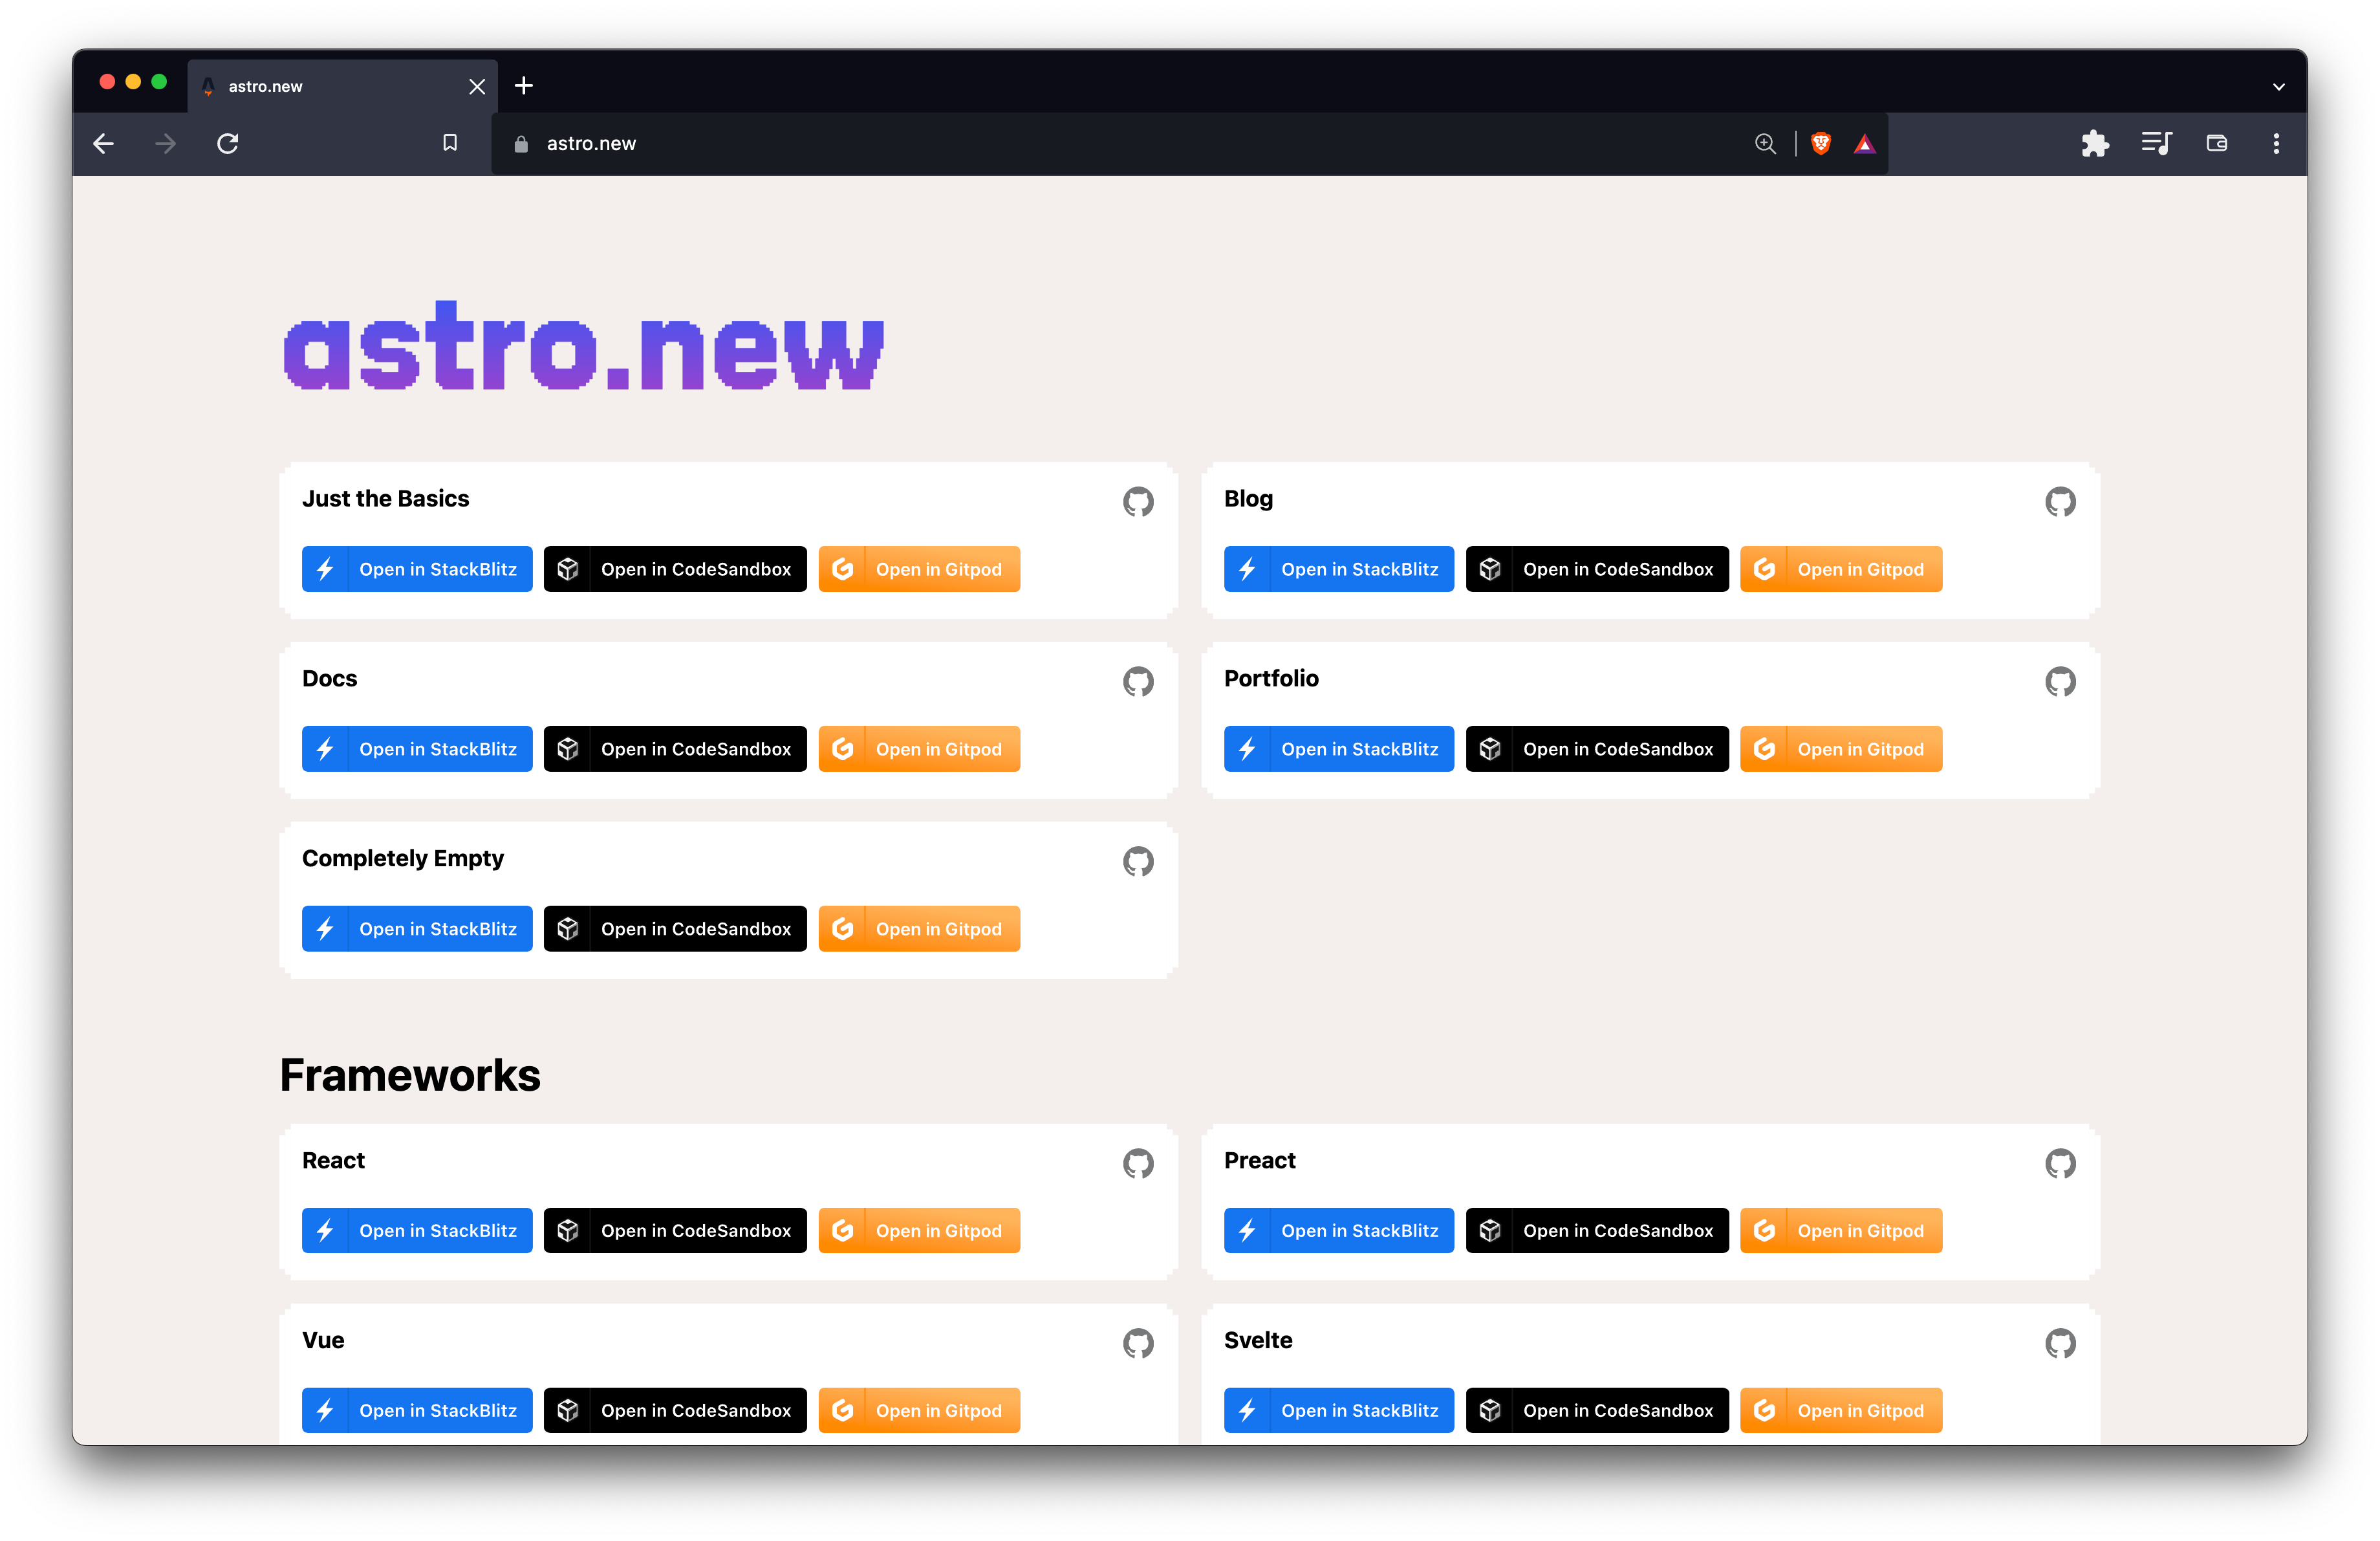 The astro.new page showing a selection of new projects to open in either StackBlitz, CodeSandbox or GitPod